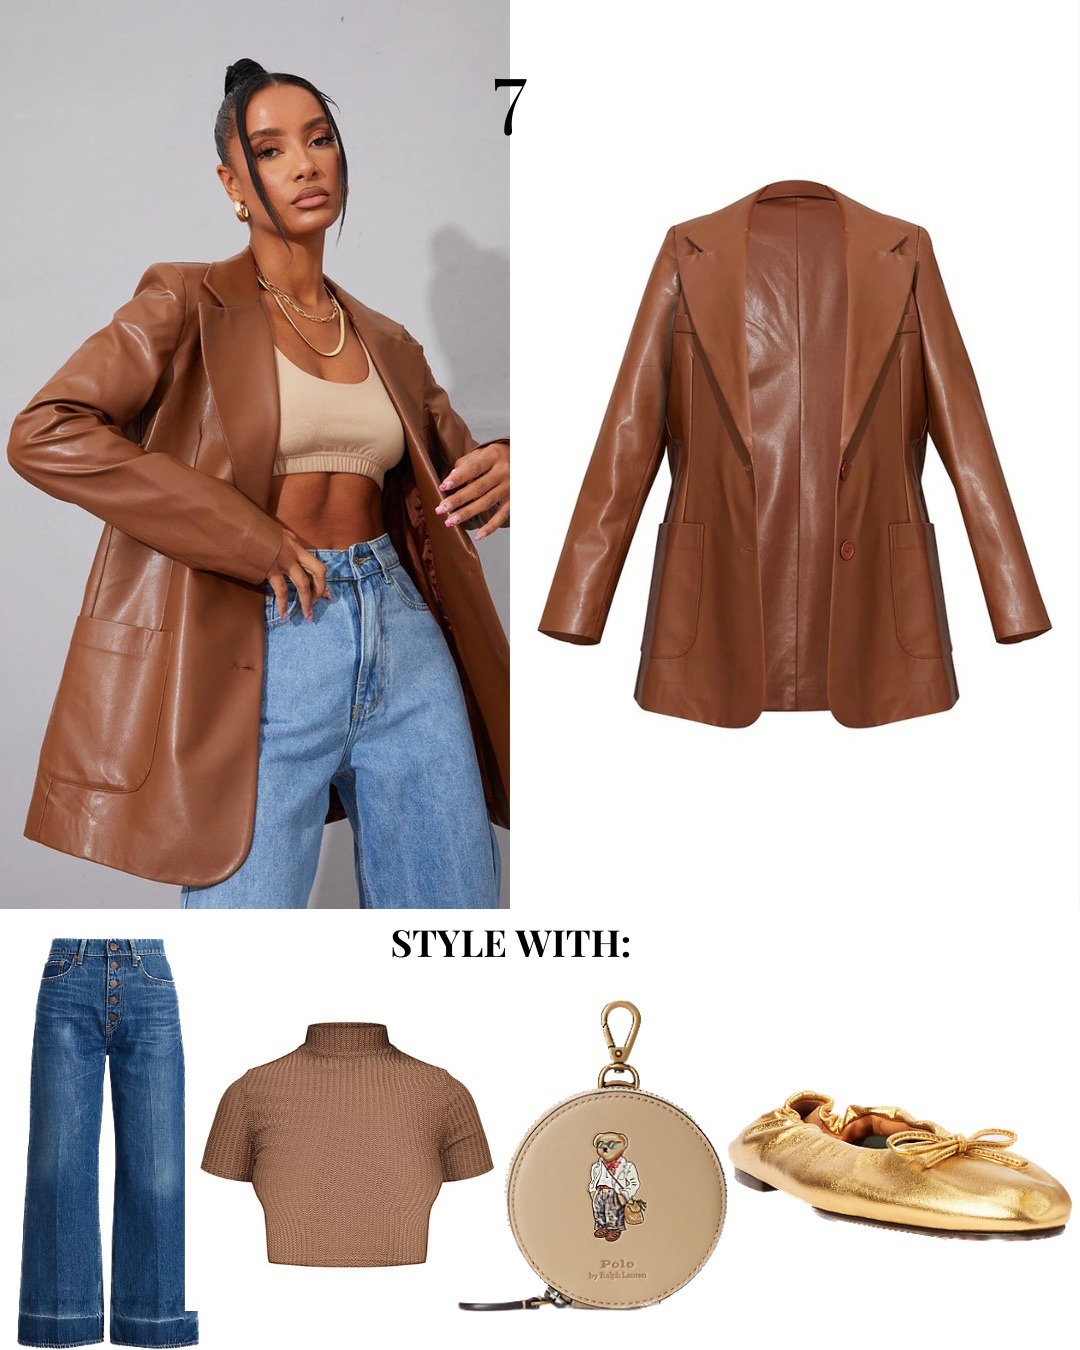 Brown blazer outfit idea for women.